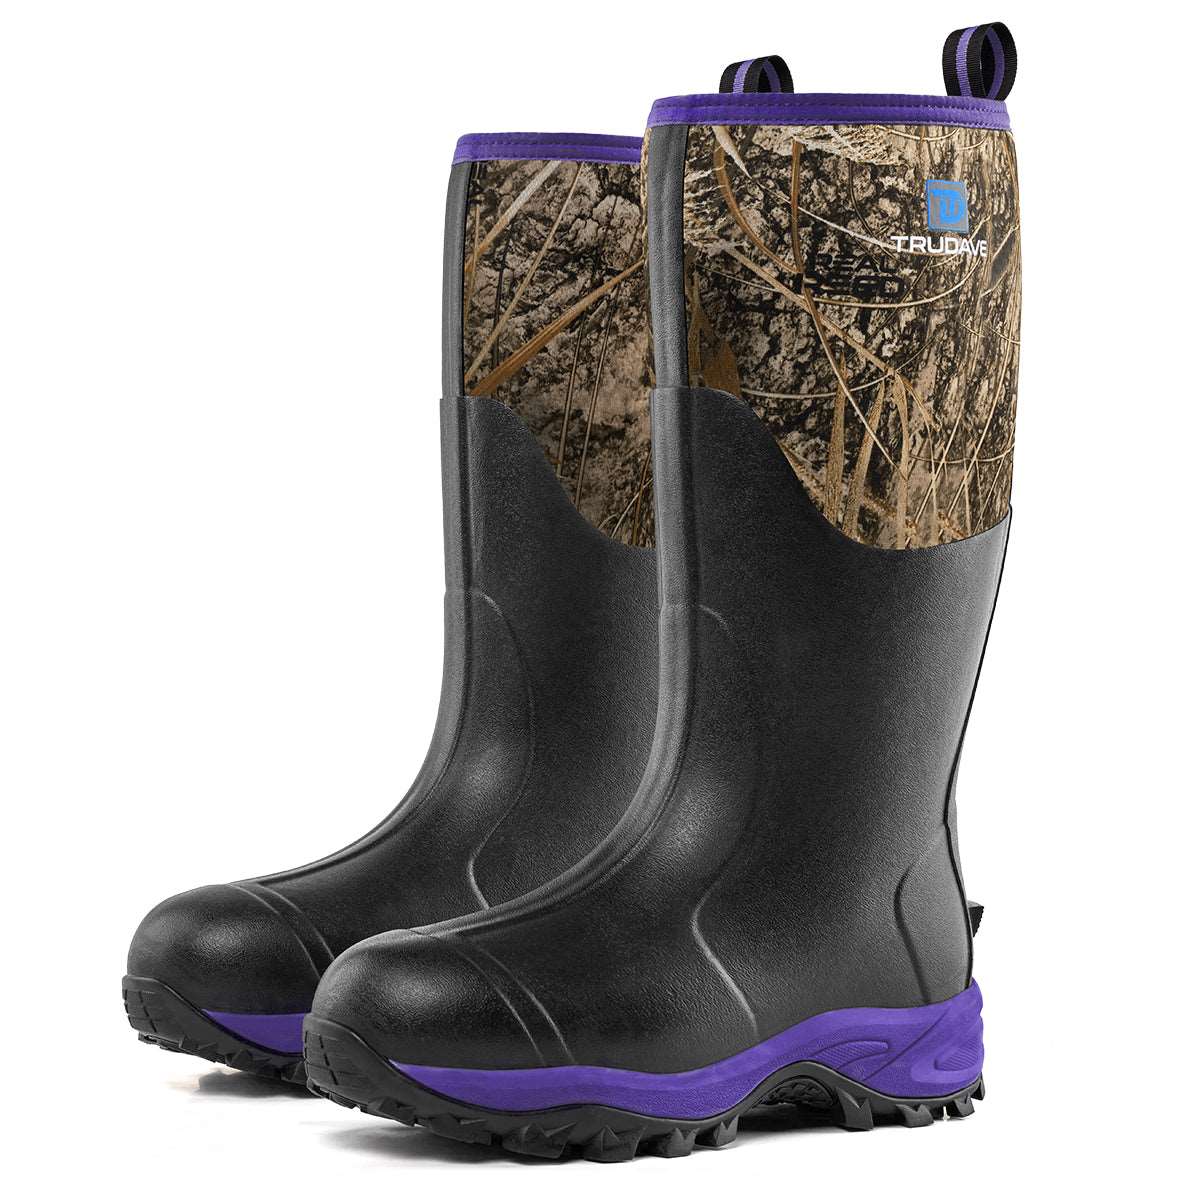 Trudave Purple Camo Rubber Hunting Boots For Women